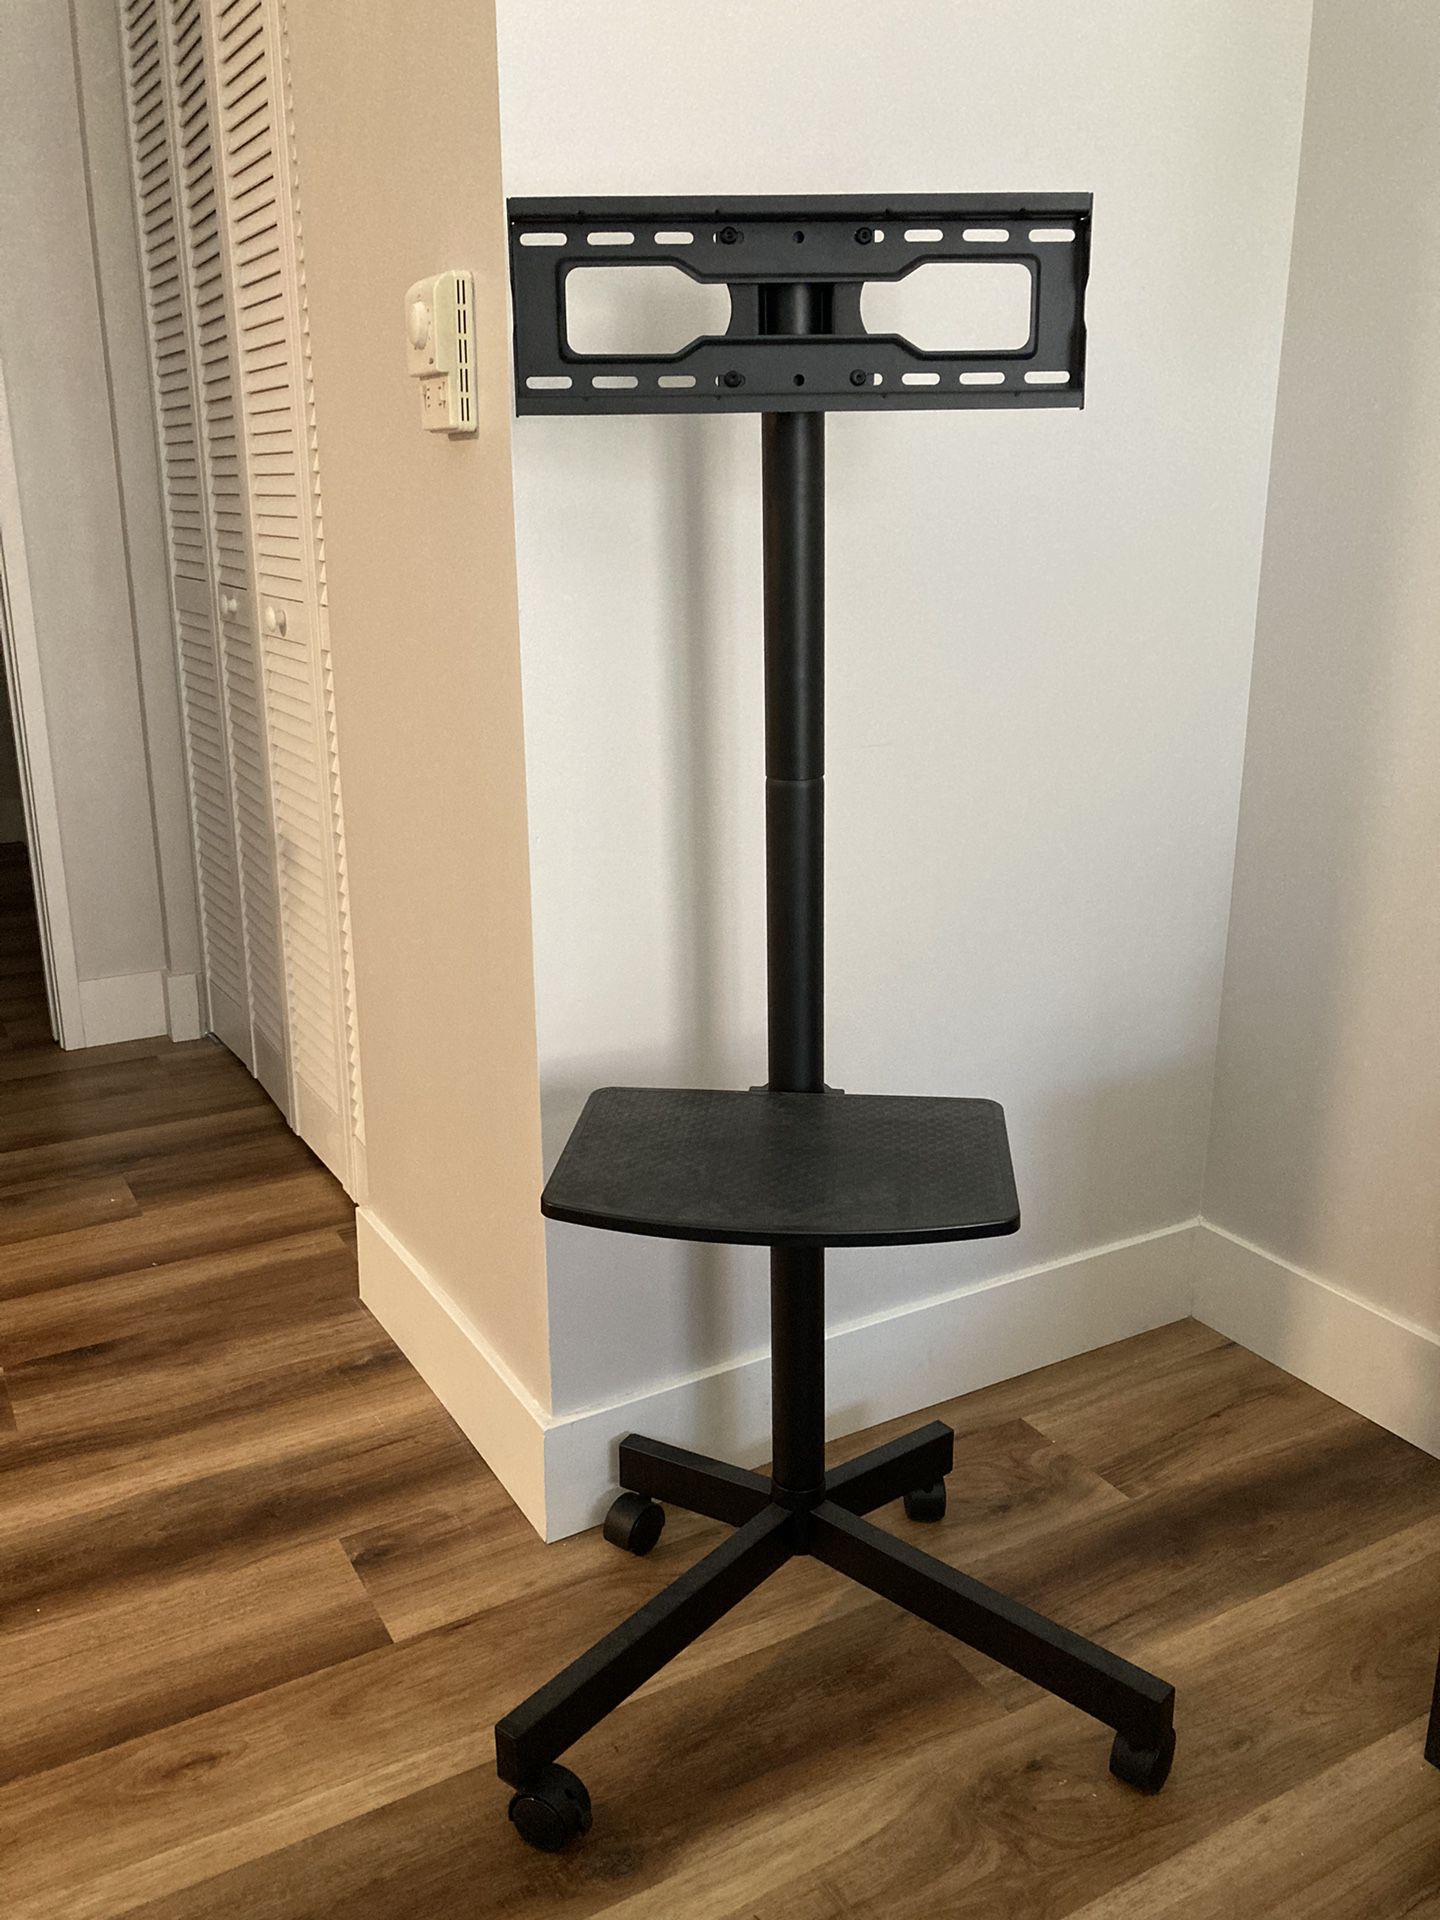 Mobile TV Stand